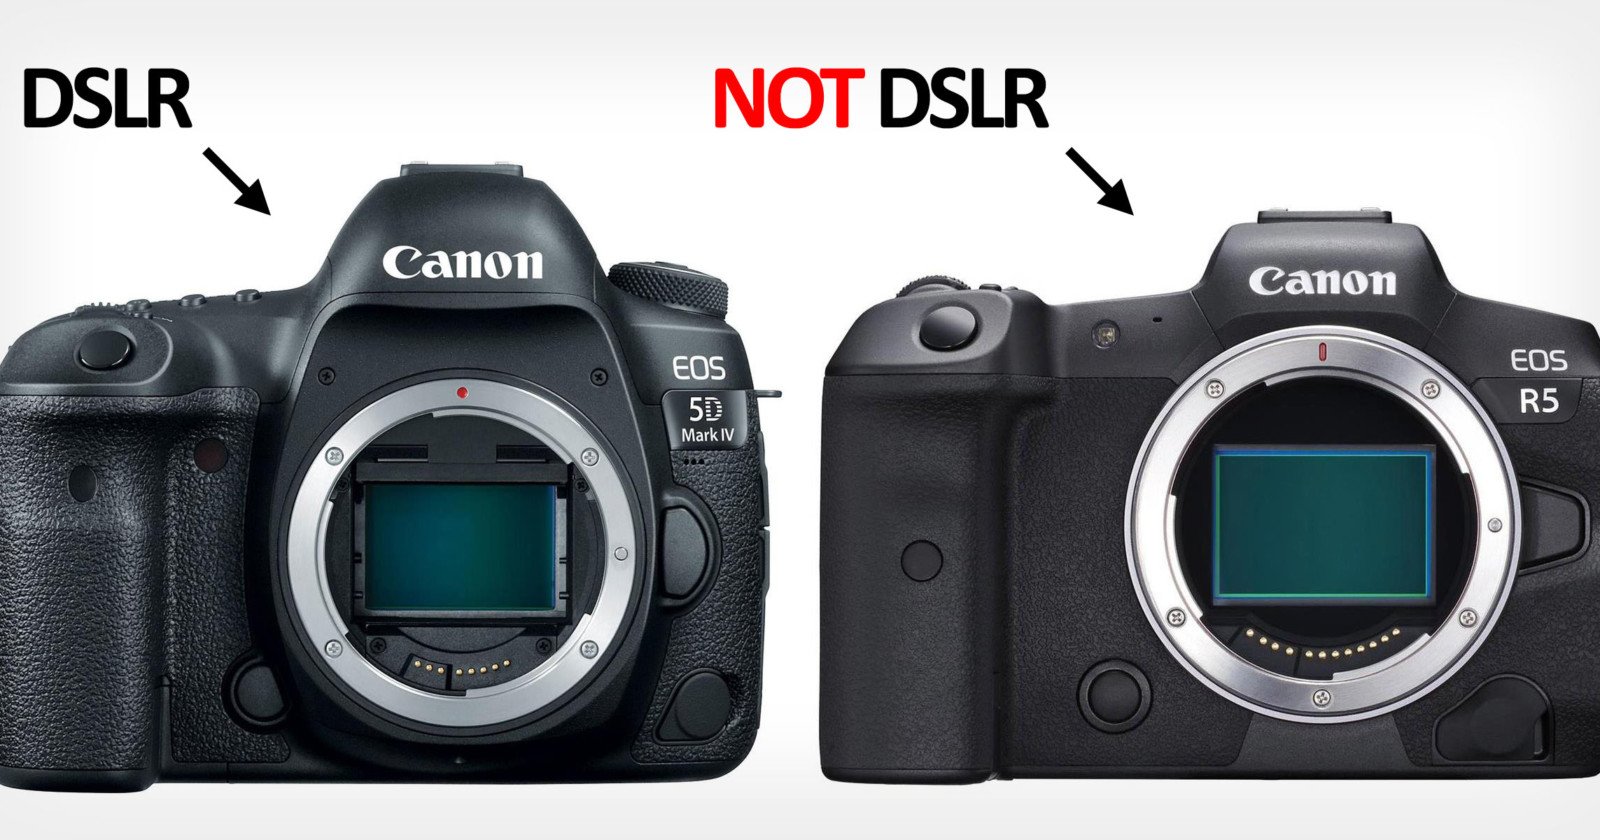  people have idea what dslr actually 